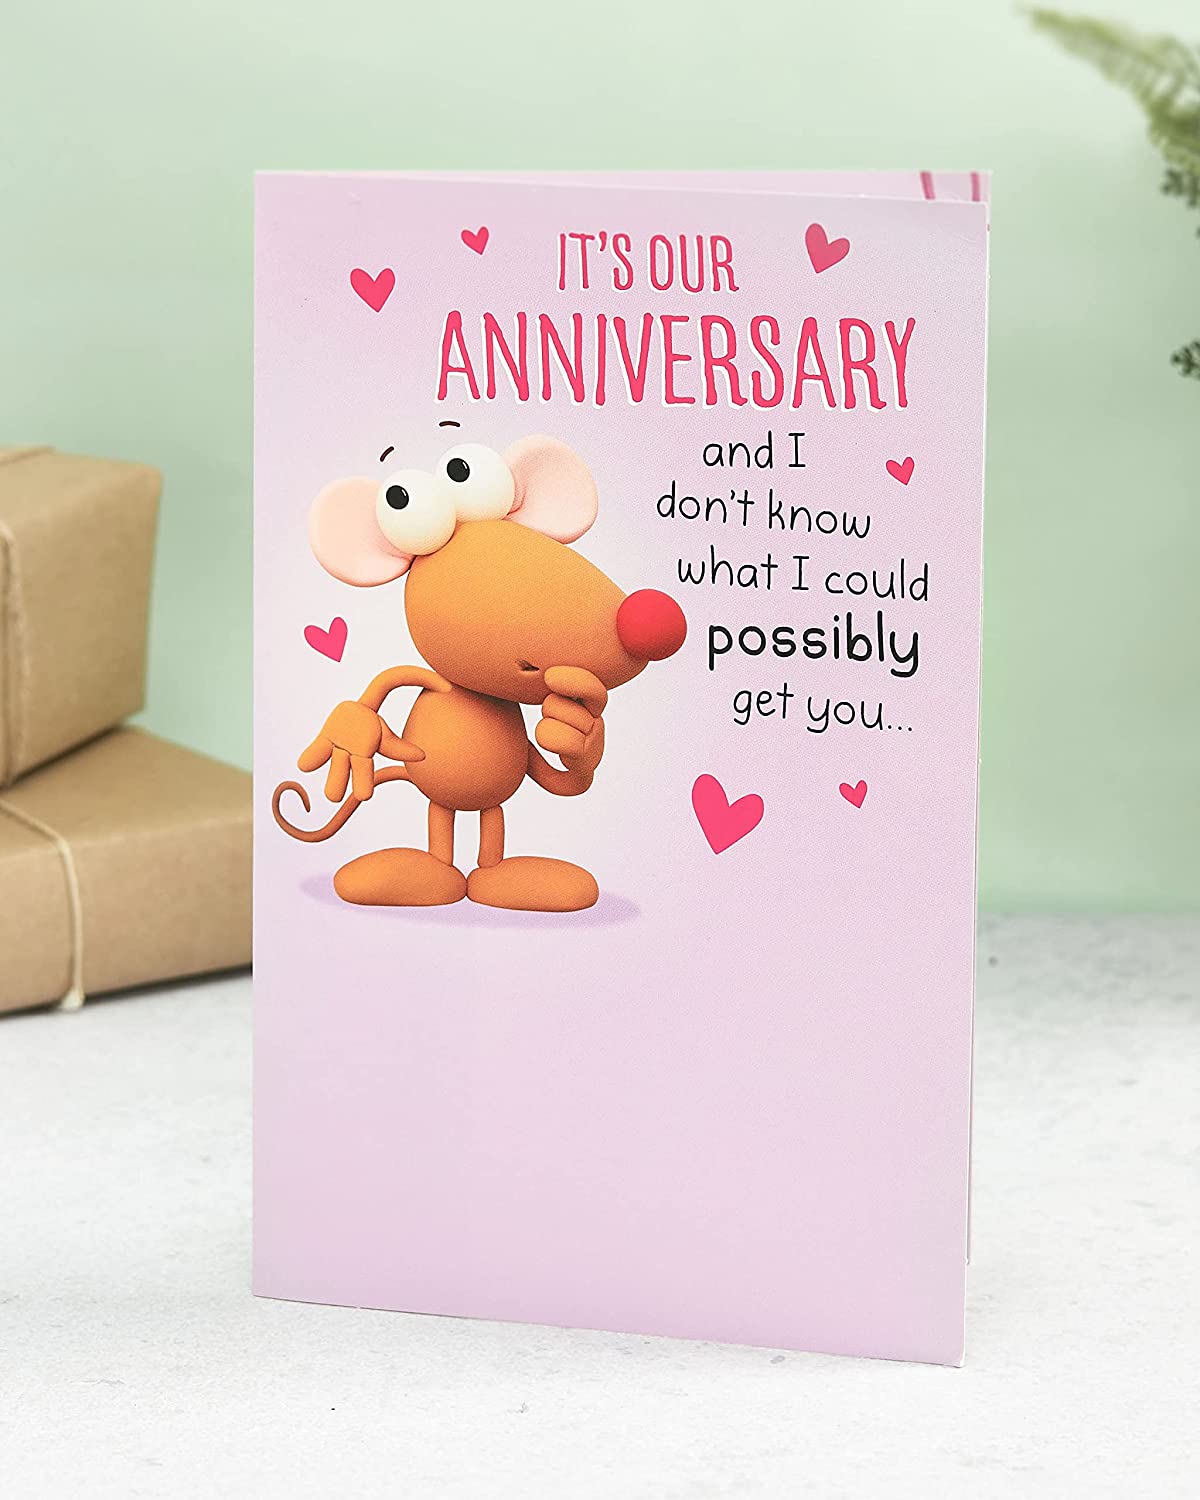 Pop Out Our Anniversary Humorous Card - When You Have Got Me